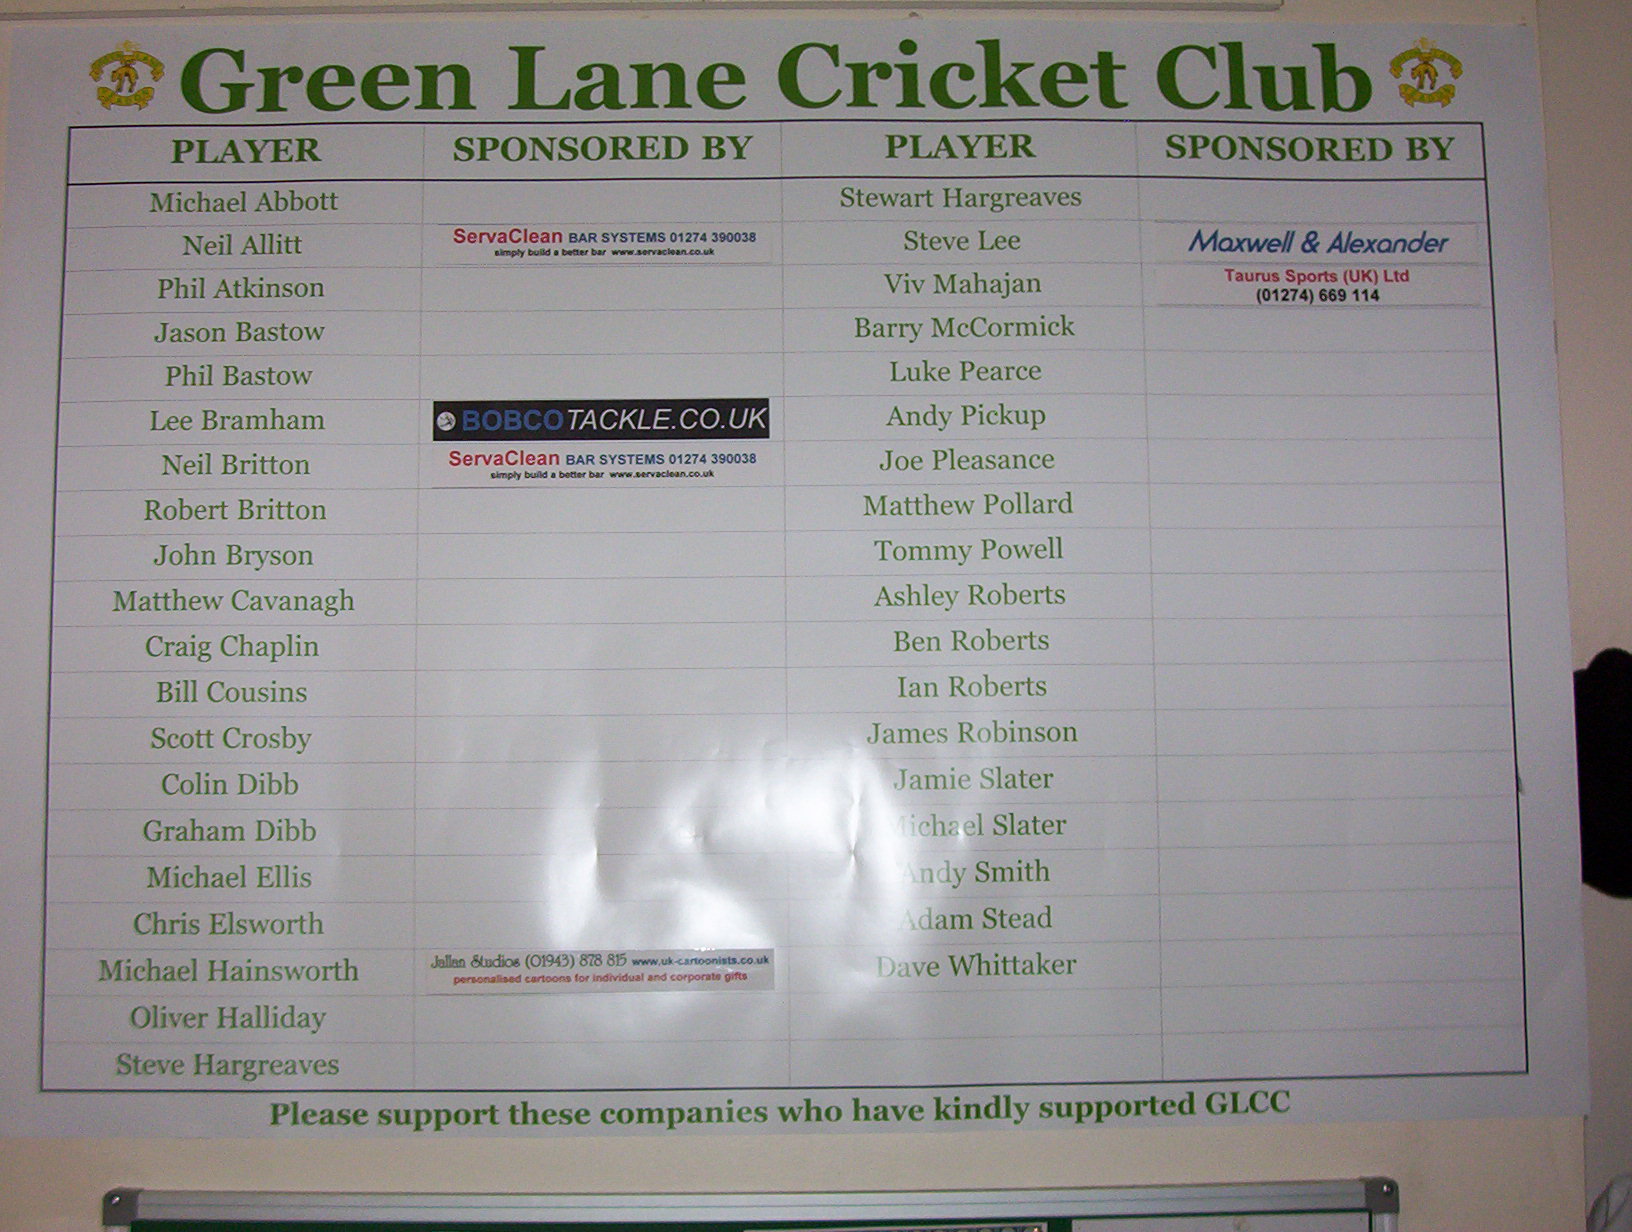 Looks like GLCC need some help with their sponsorship. Think Pod has a few ideas, watch this space!!